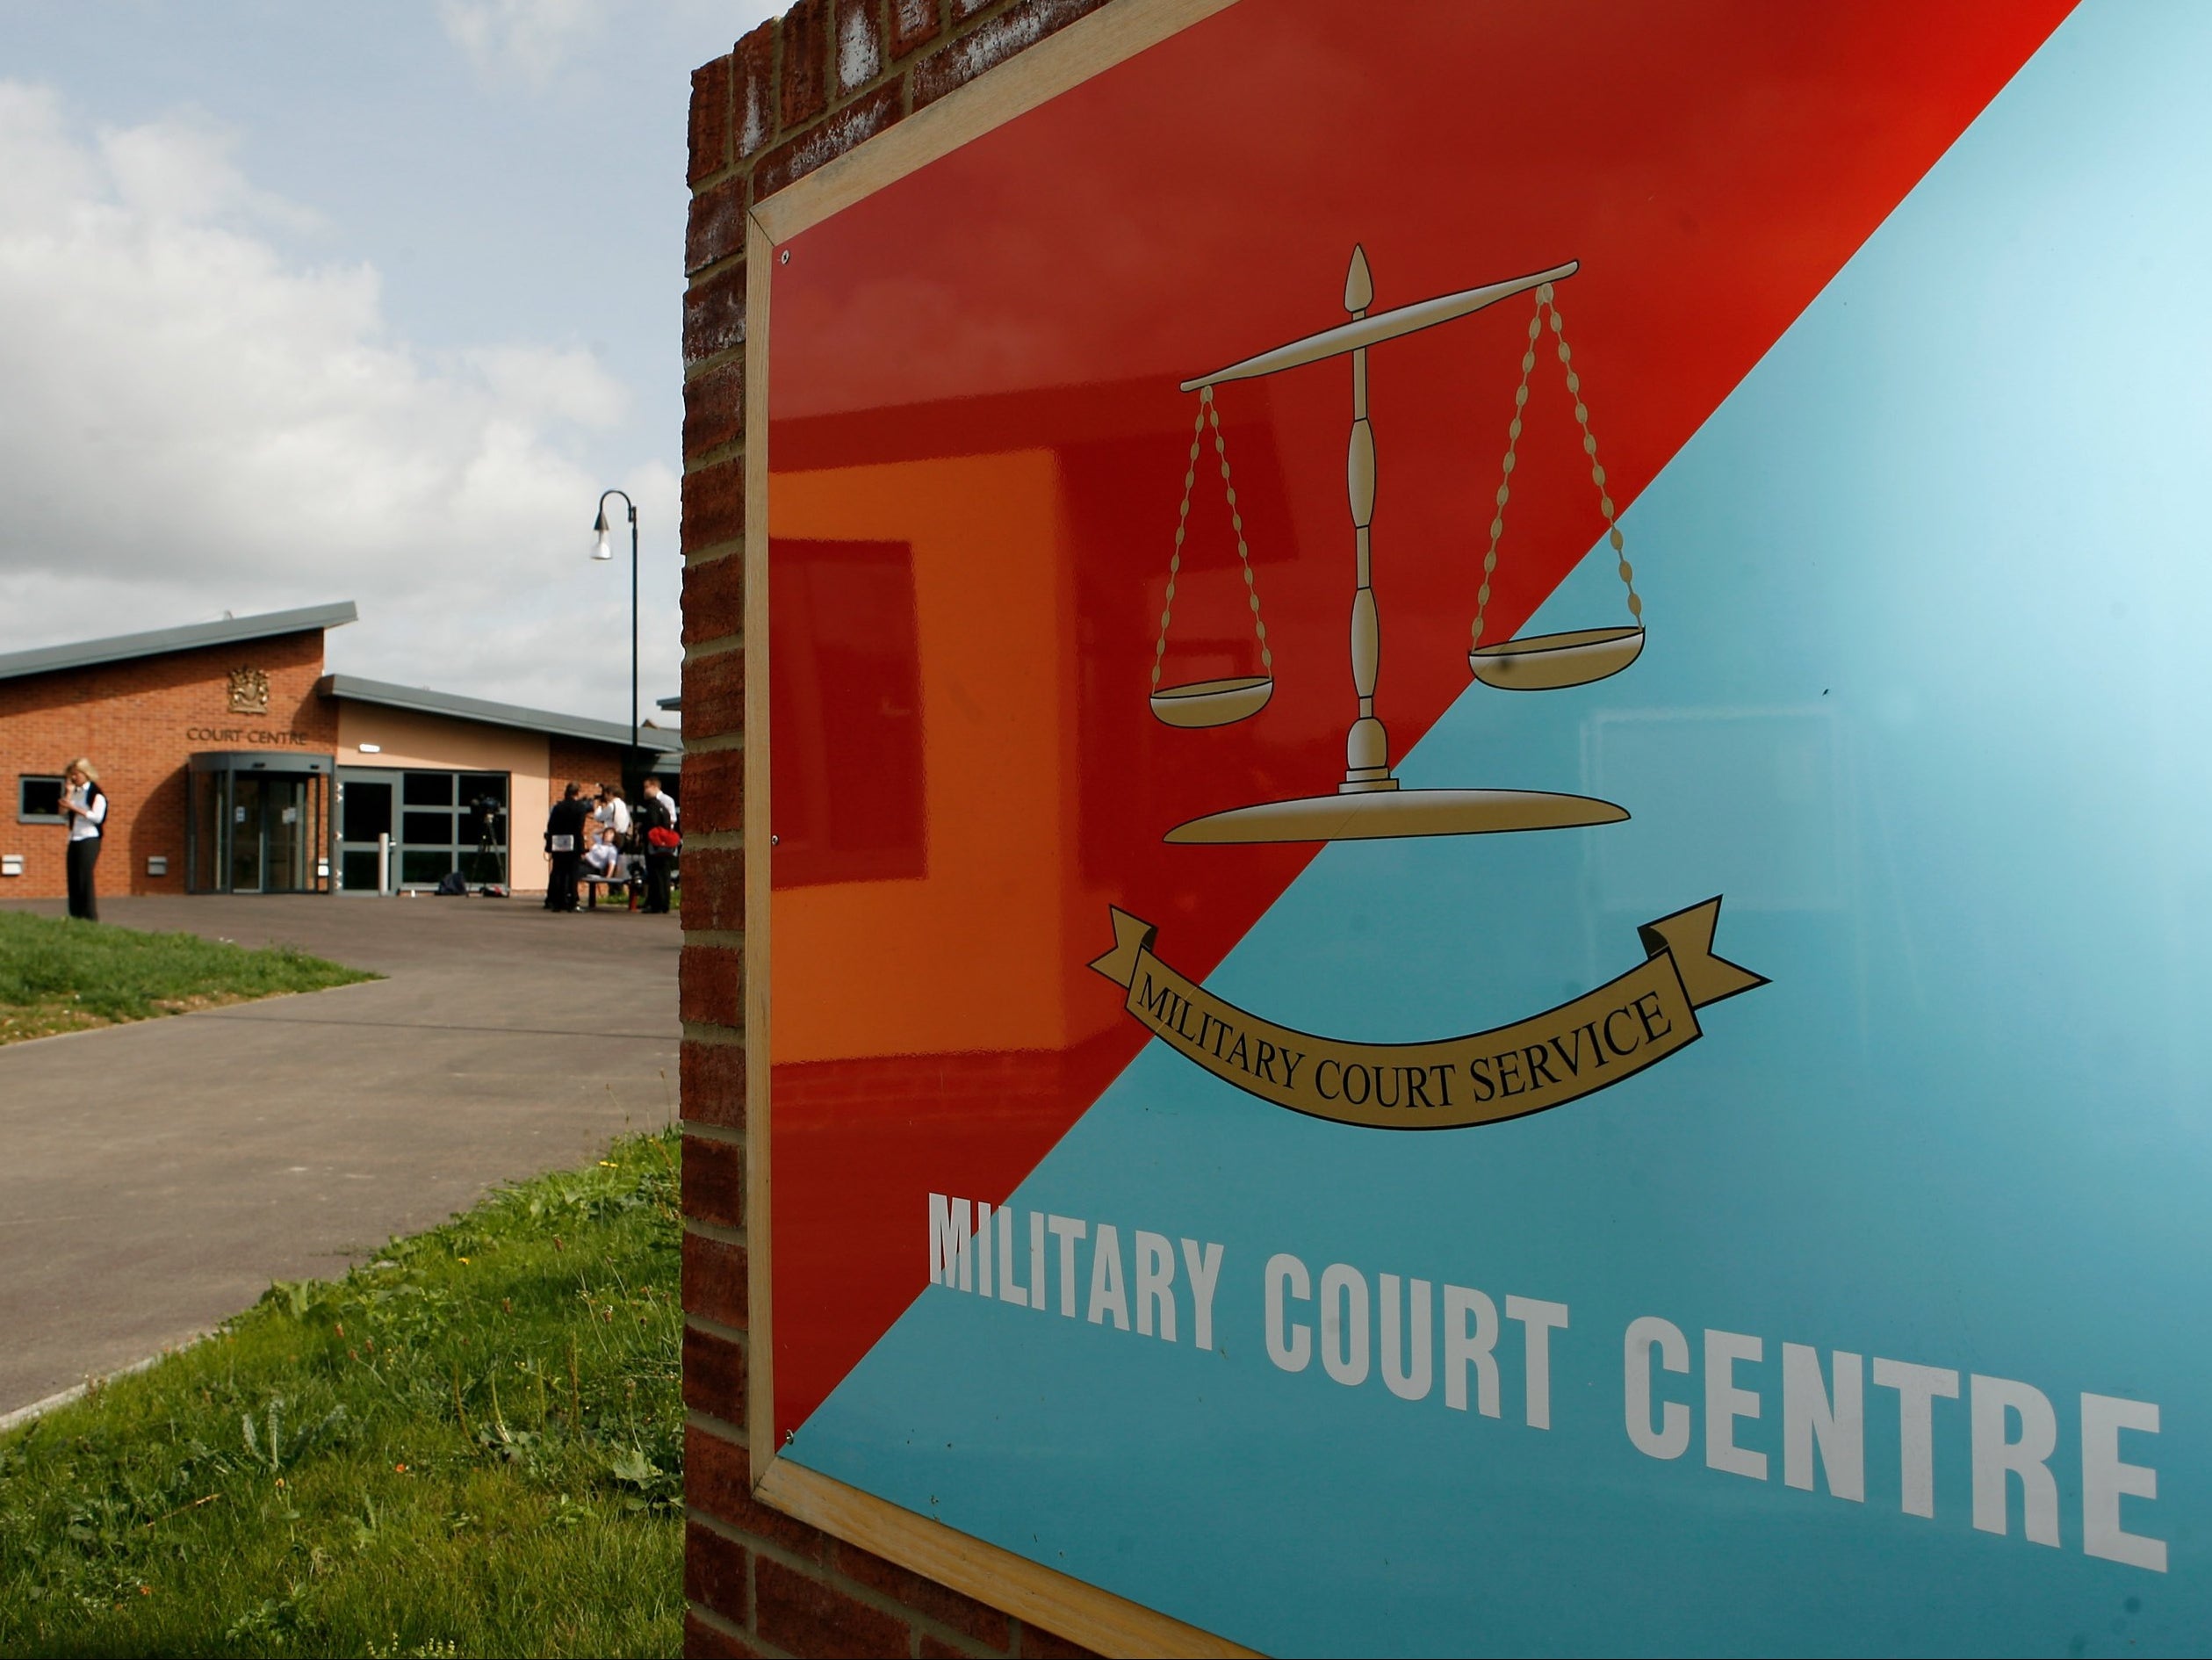 AB William Stewart was sentenced to eight and a half years at Bulford military court in Salisbury